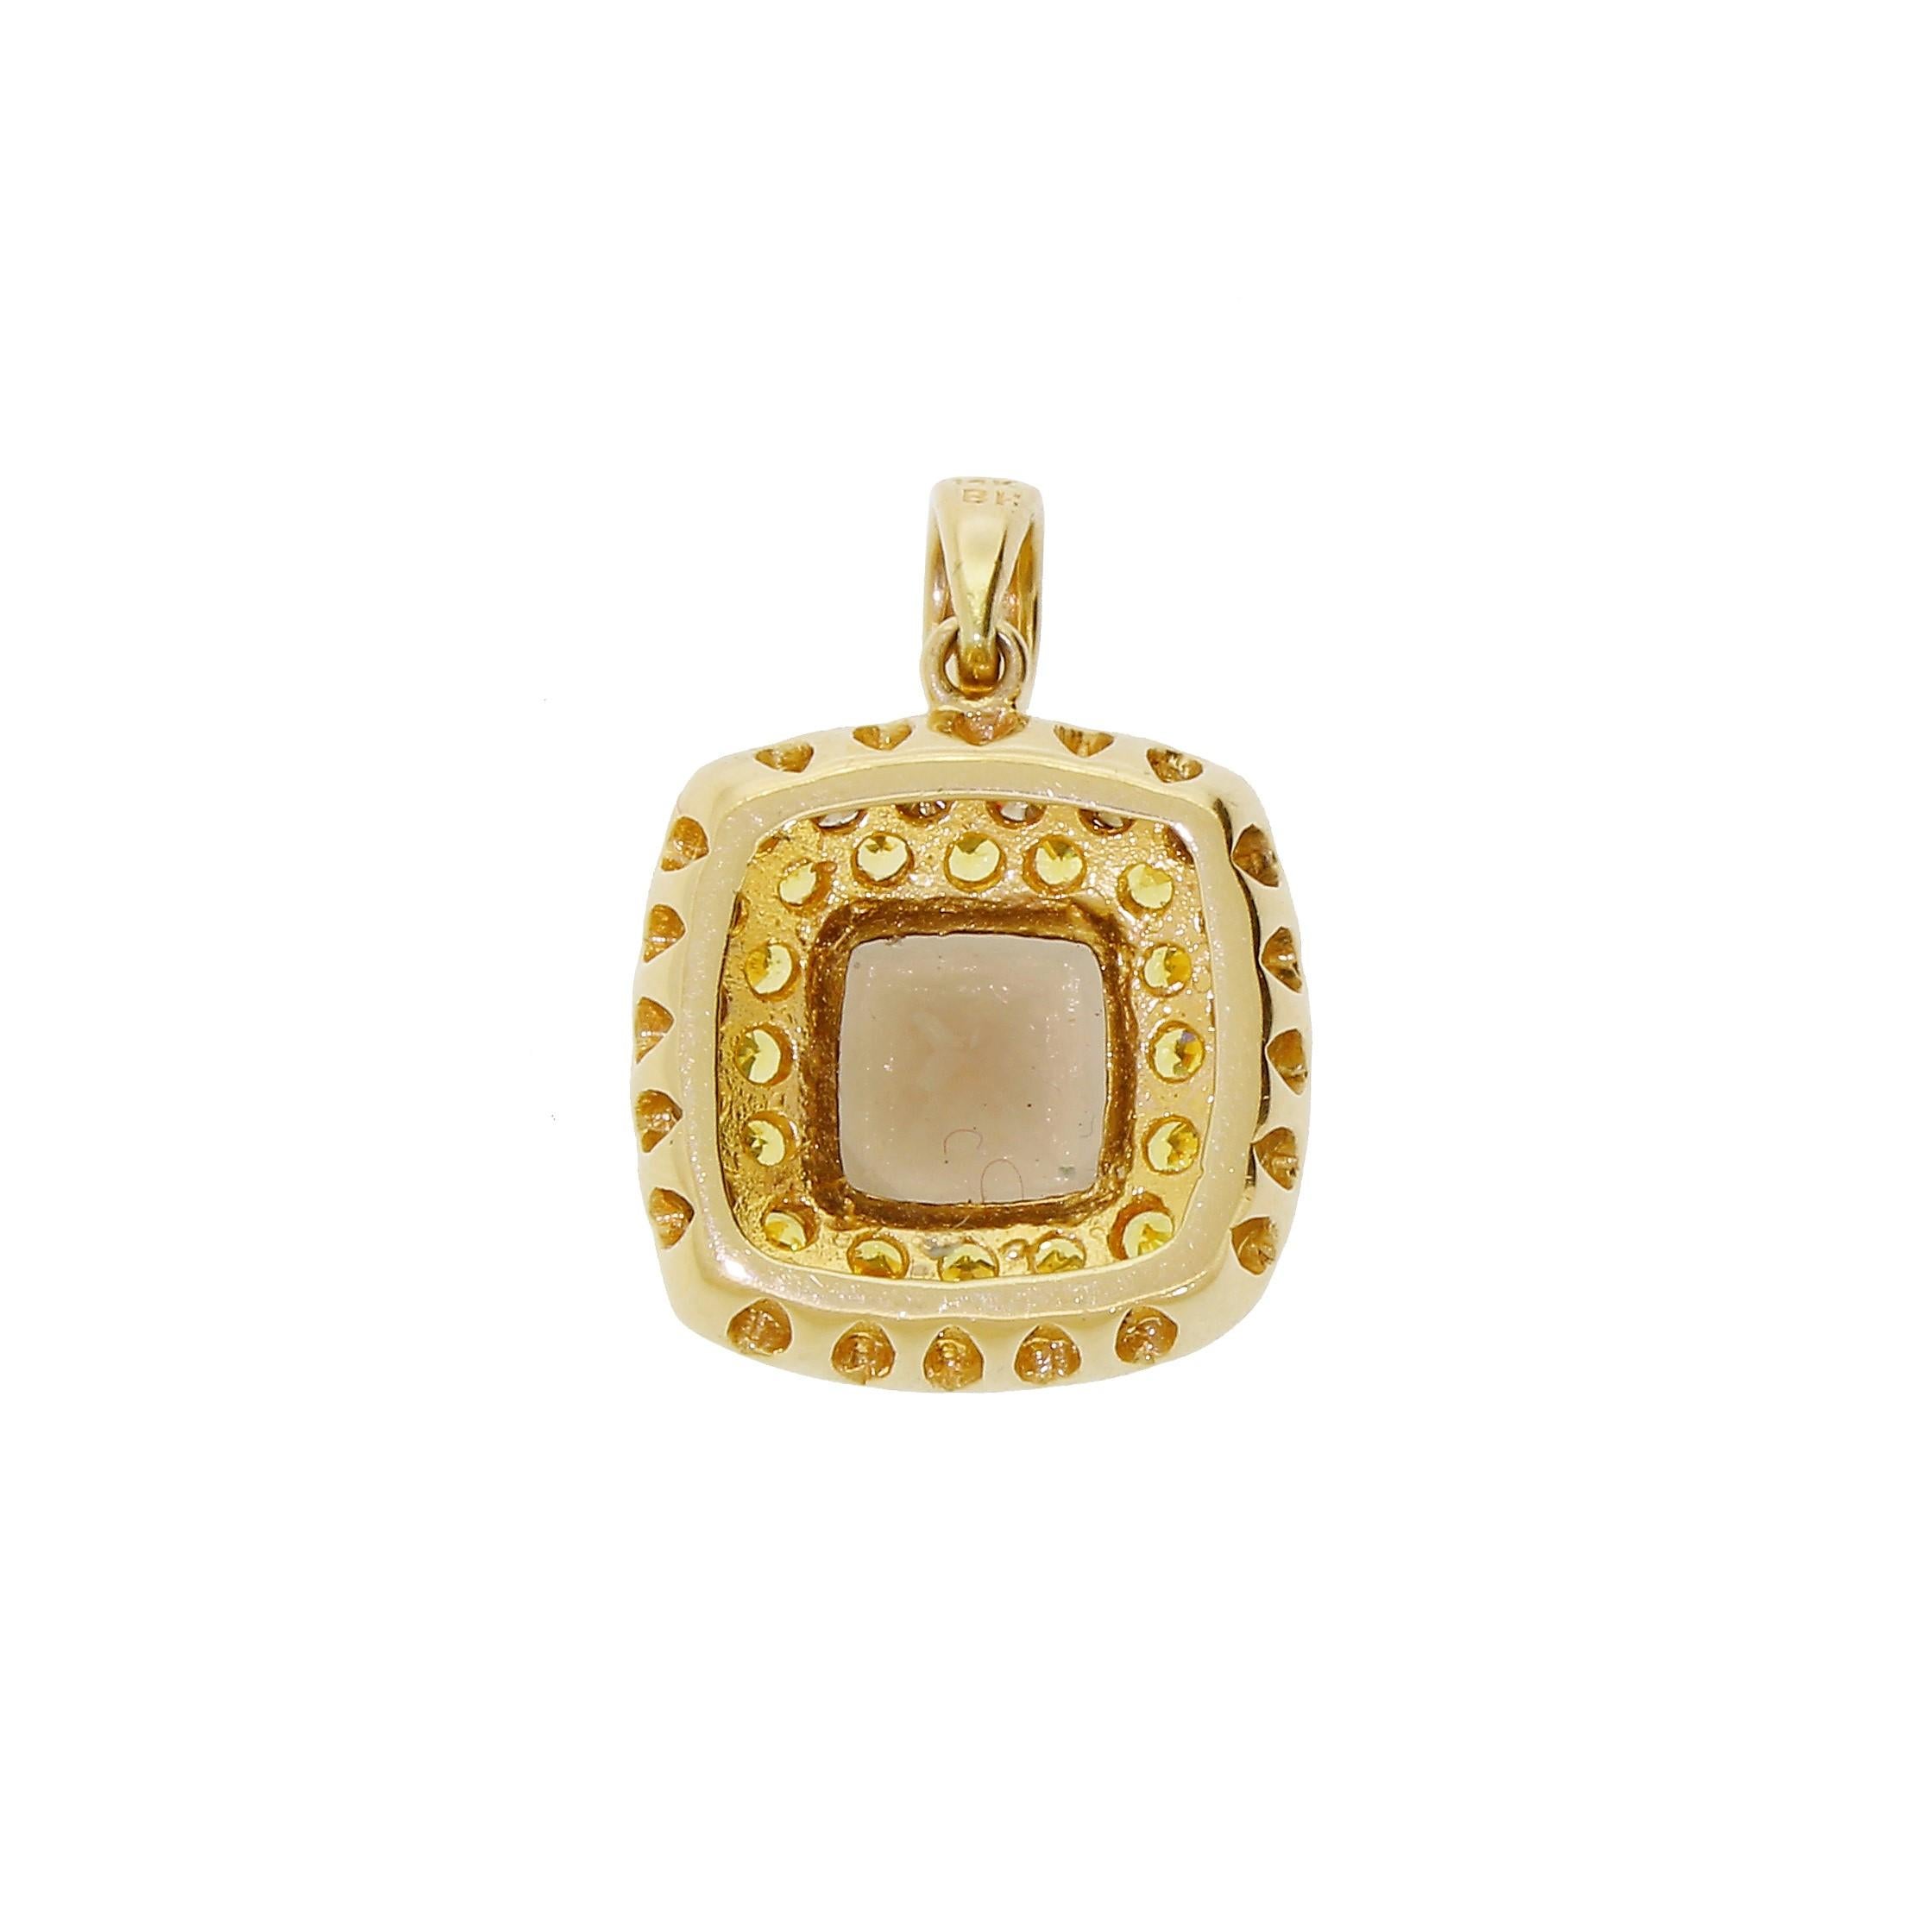 This beautiful pendant has only been worn a few times, and then carefully stored in a box. As a result, this piece is in flawless, like-new condition. This gorgeous pendant is the result of designer Effy Hematian's obsession with quality and